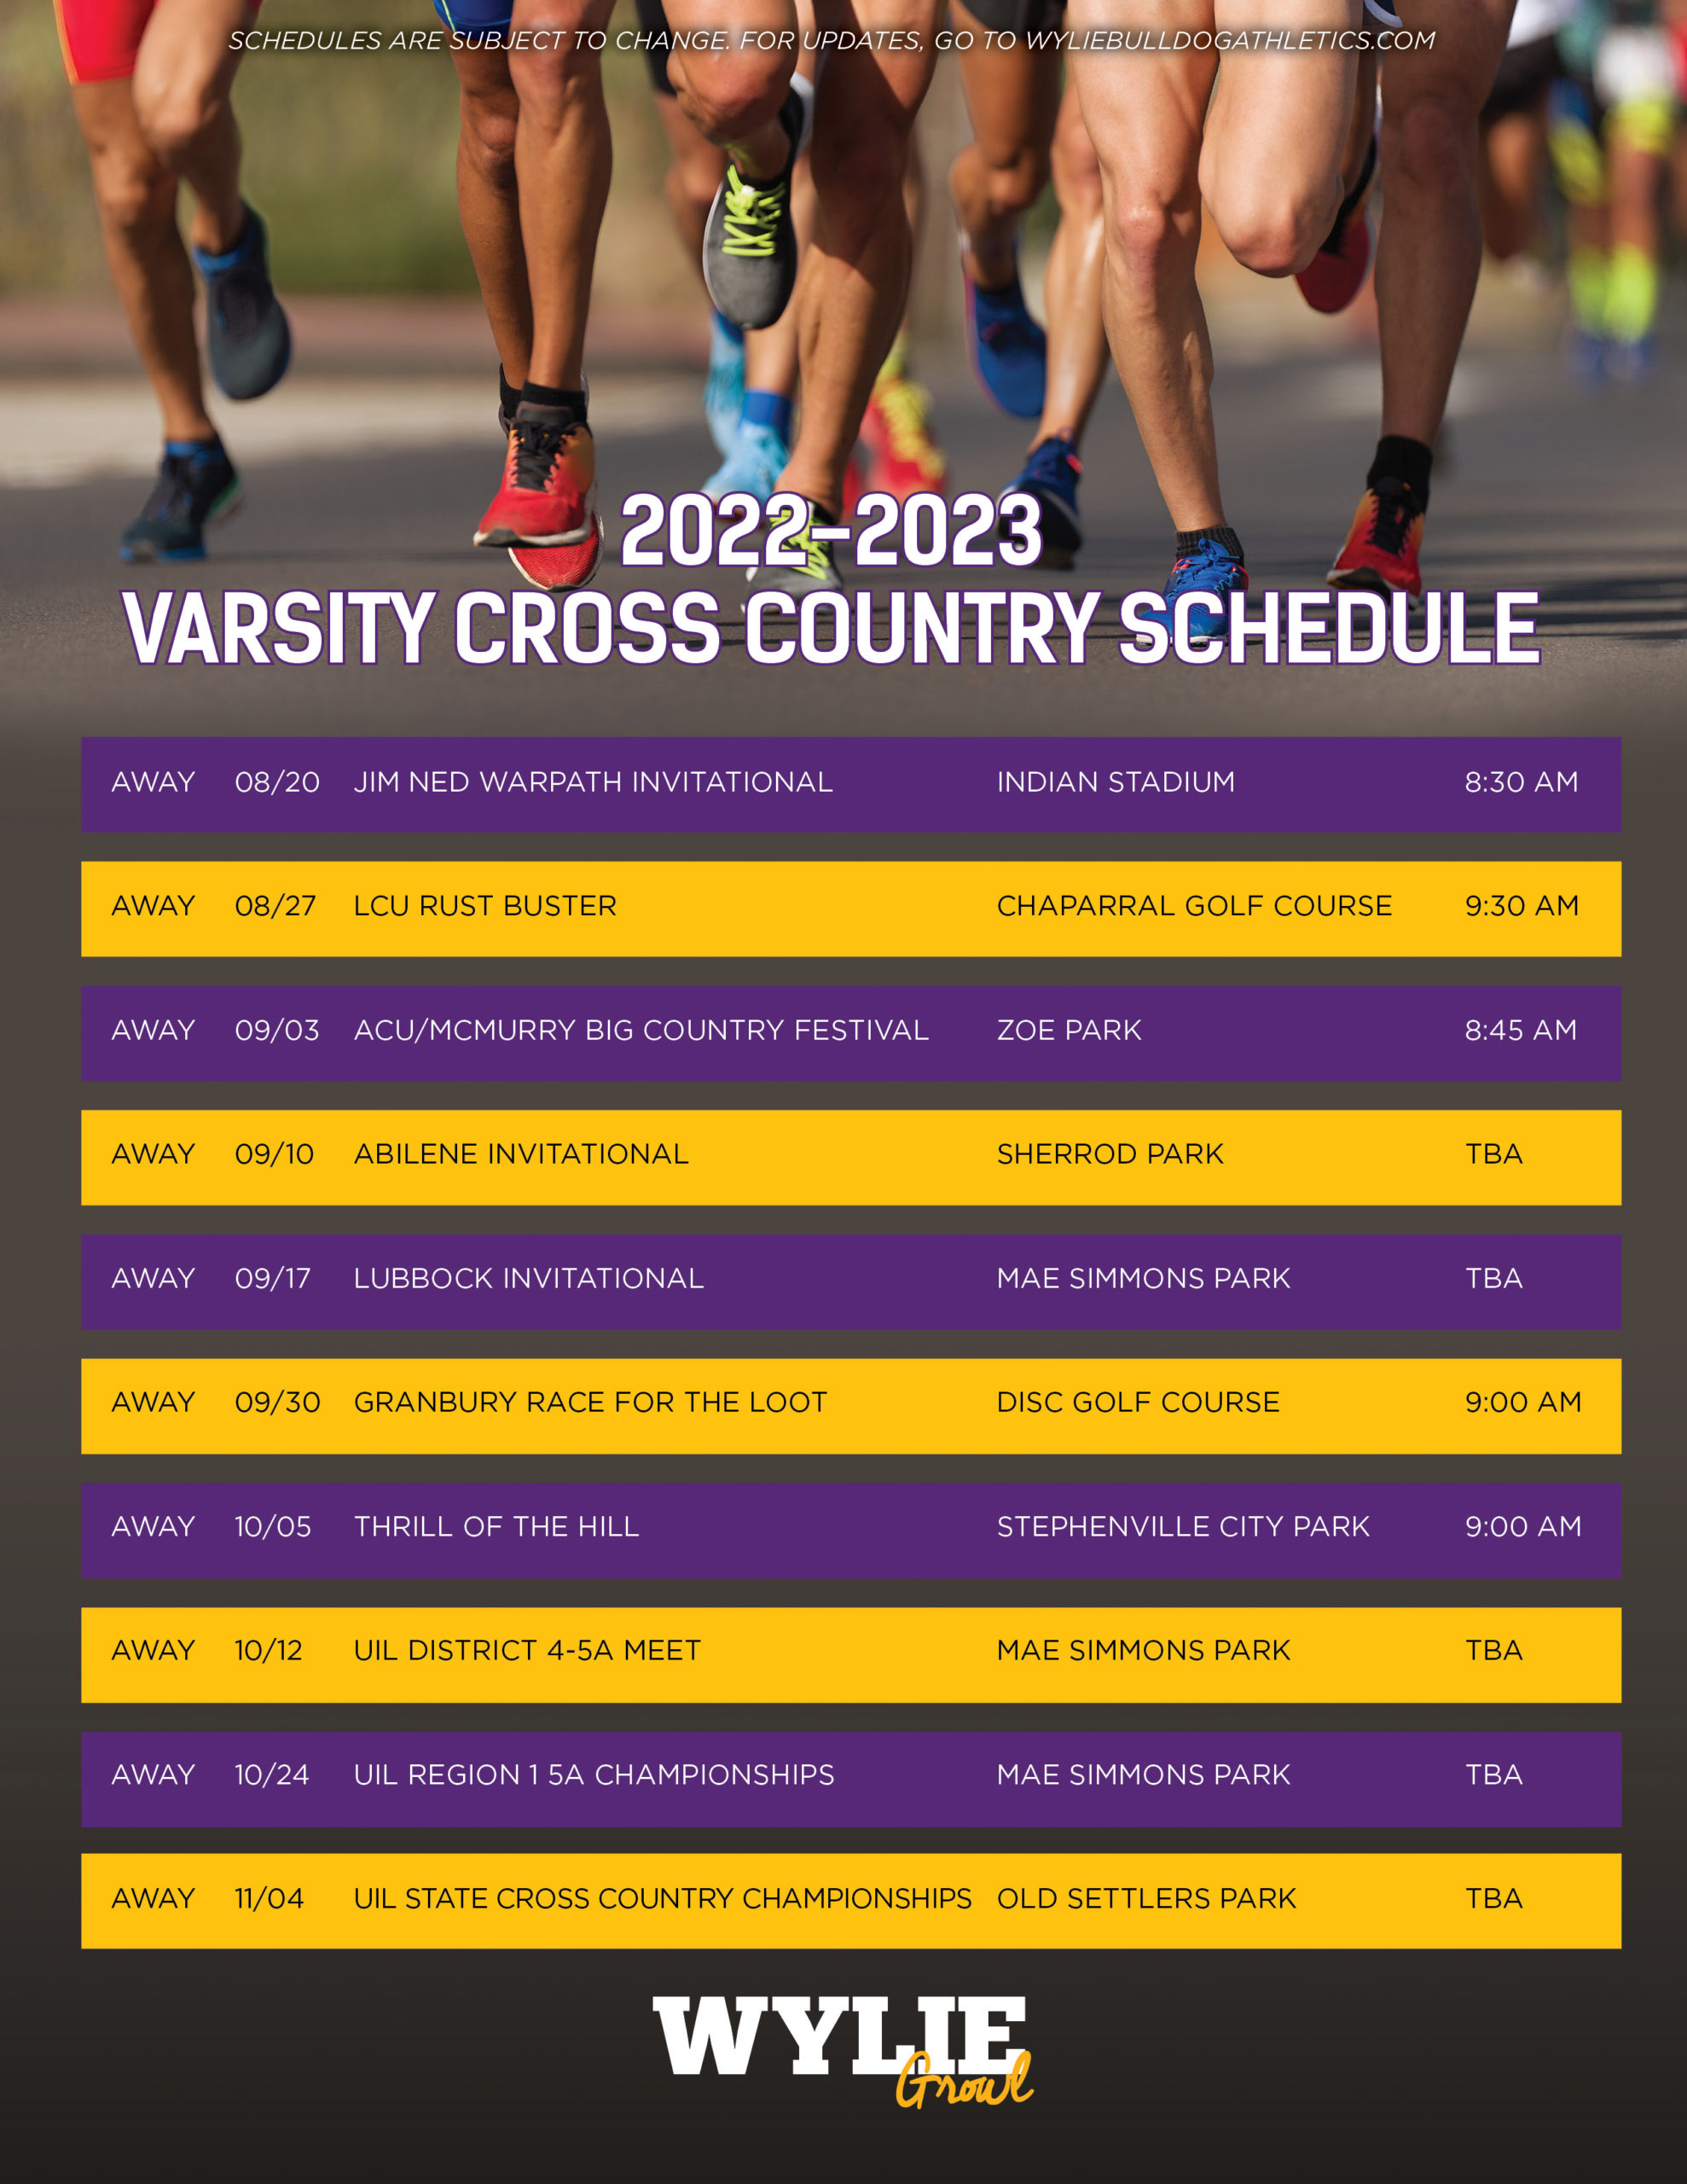 Wylie Cross Country Schedule 